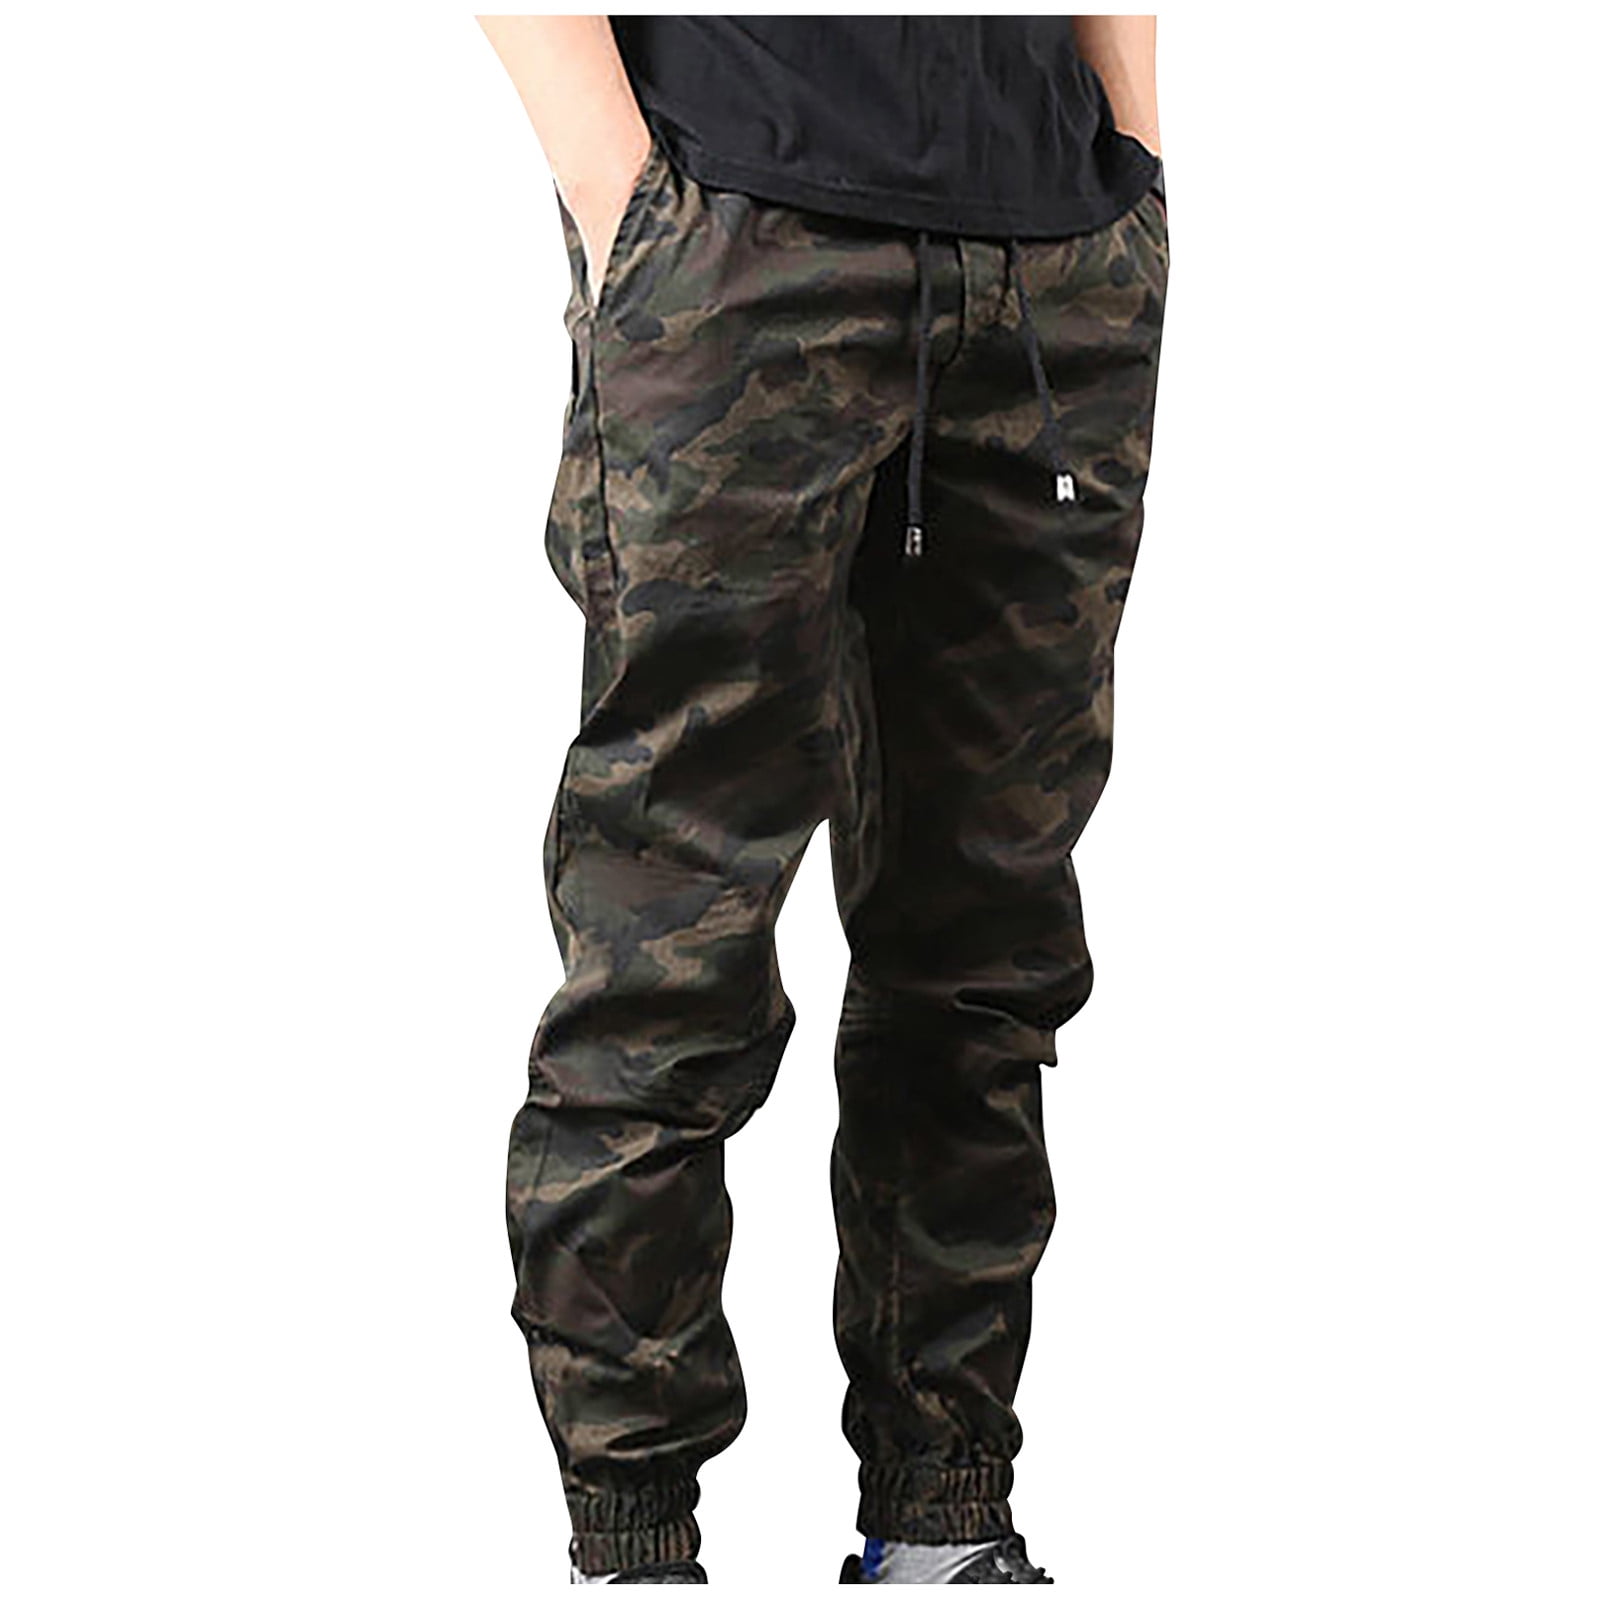 Men's Casual Cargo Pants Military Army Camo Pants Combat Work Pants with  Pockets Hiking Camping Fishing Running Athletic Active Jogger Pant  Clearance Sale White XL 